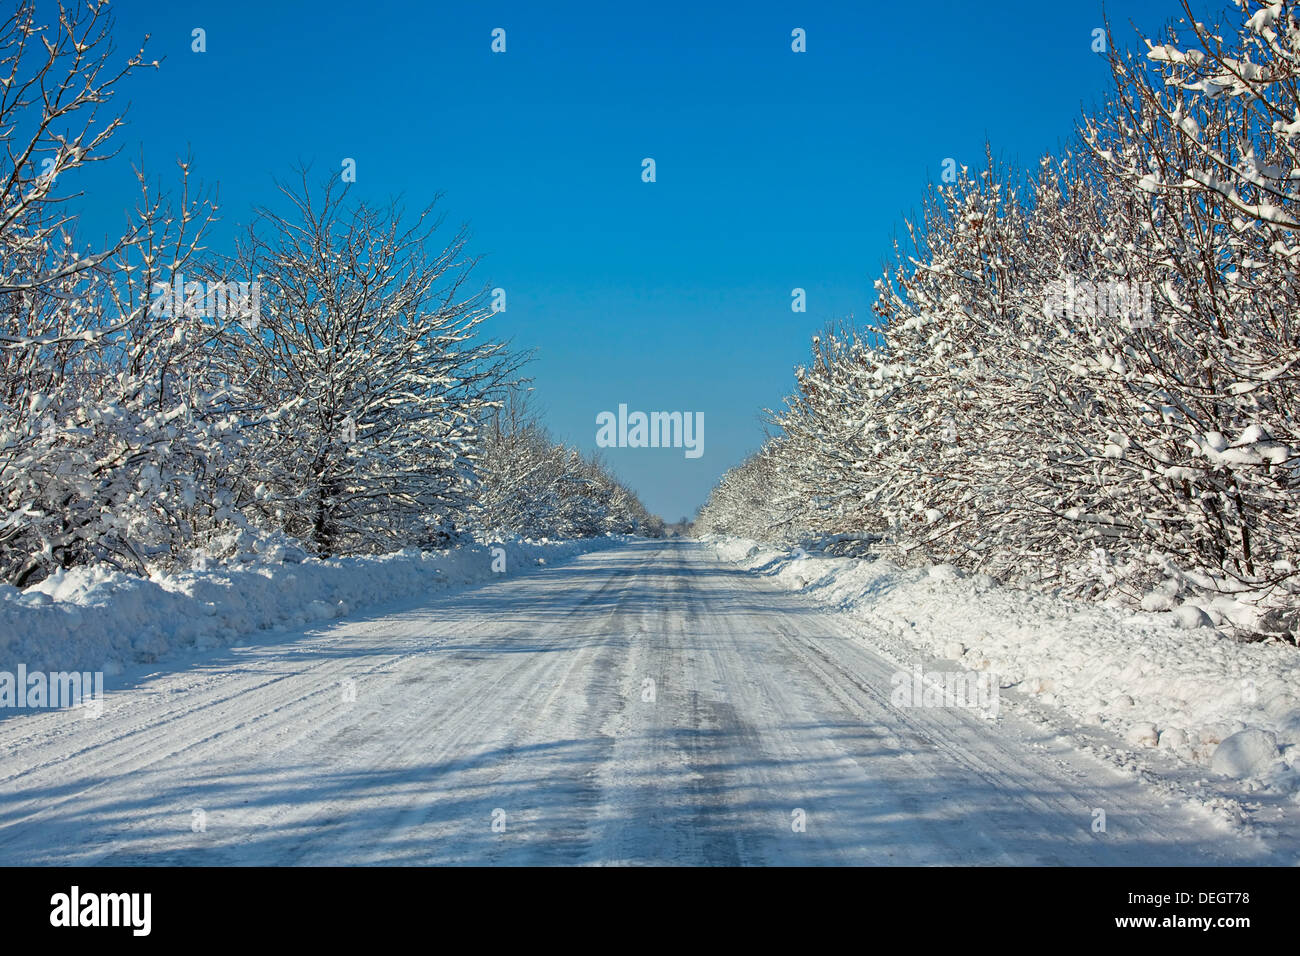 Snow-covered road with tree Stock Photo